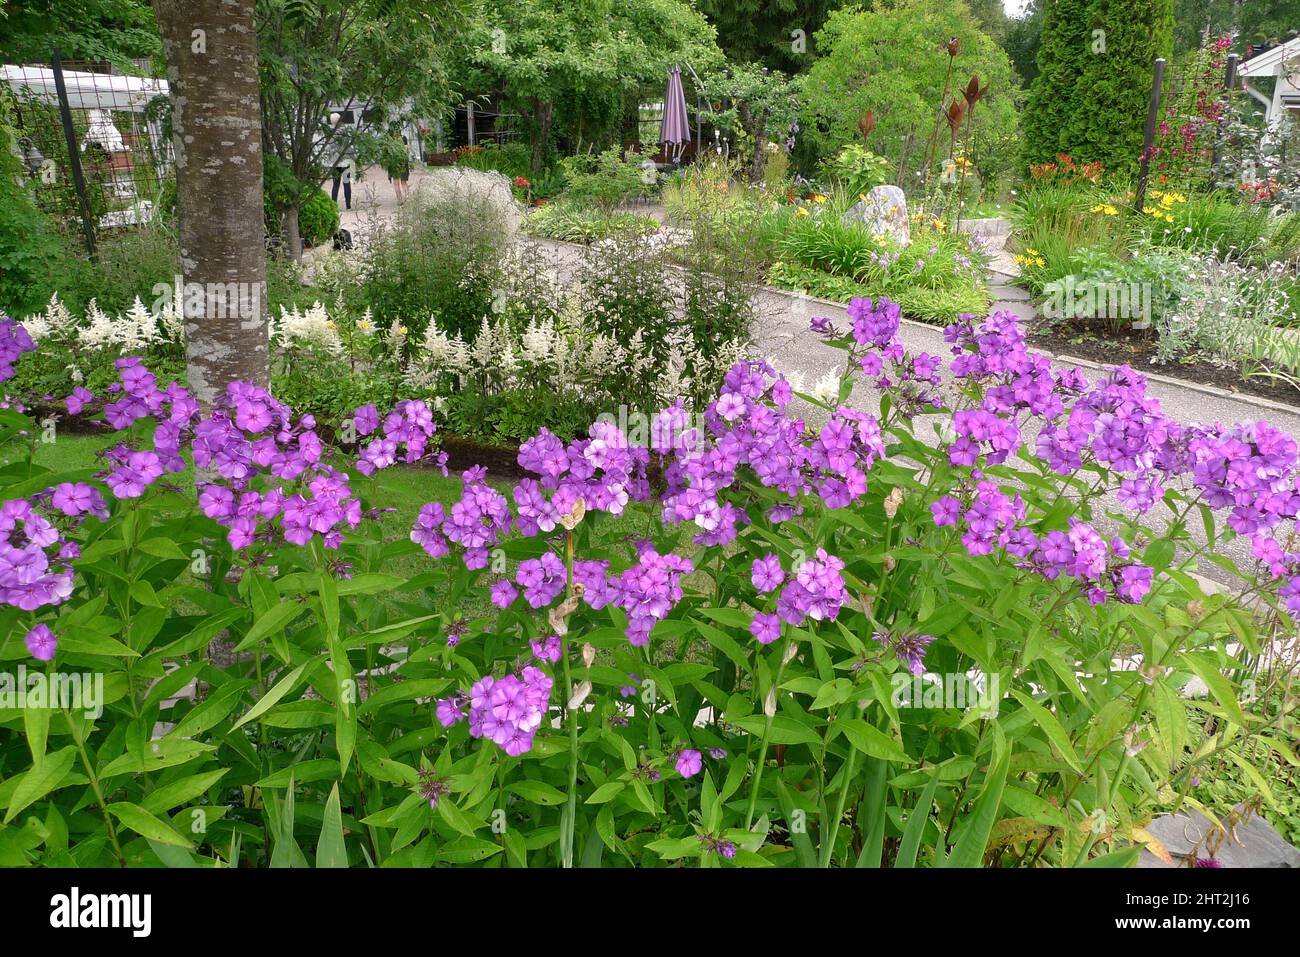 Autumn phlox in the foreground, behind white astilbe and bridal veil. Stock Photo